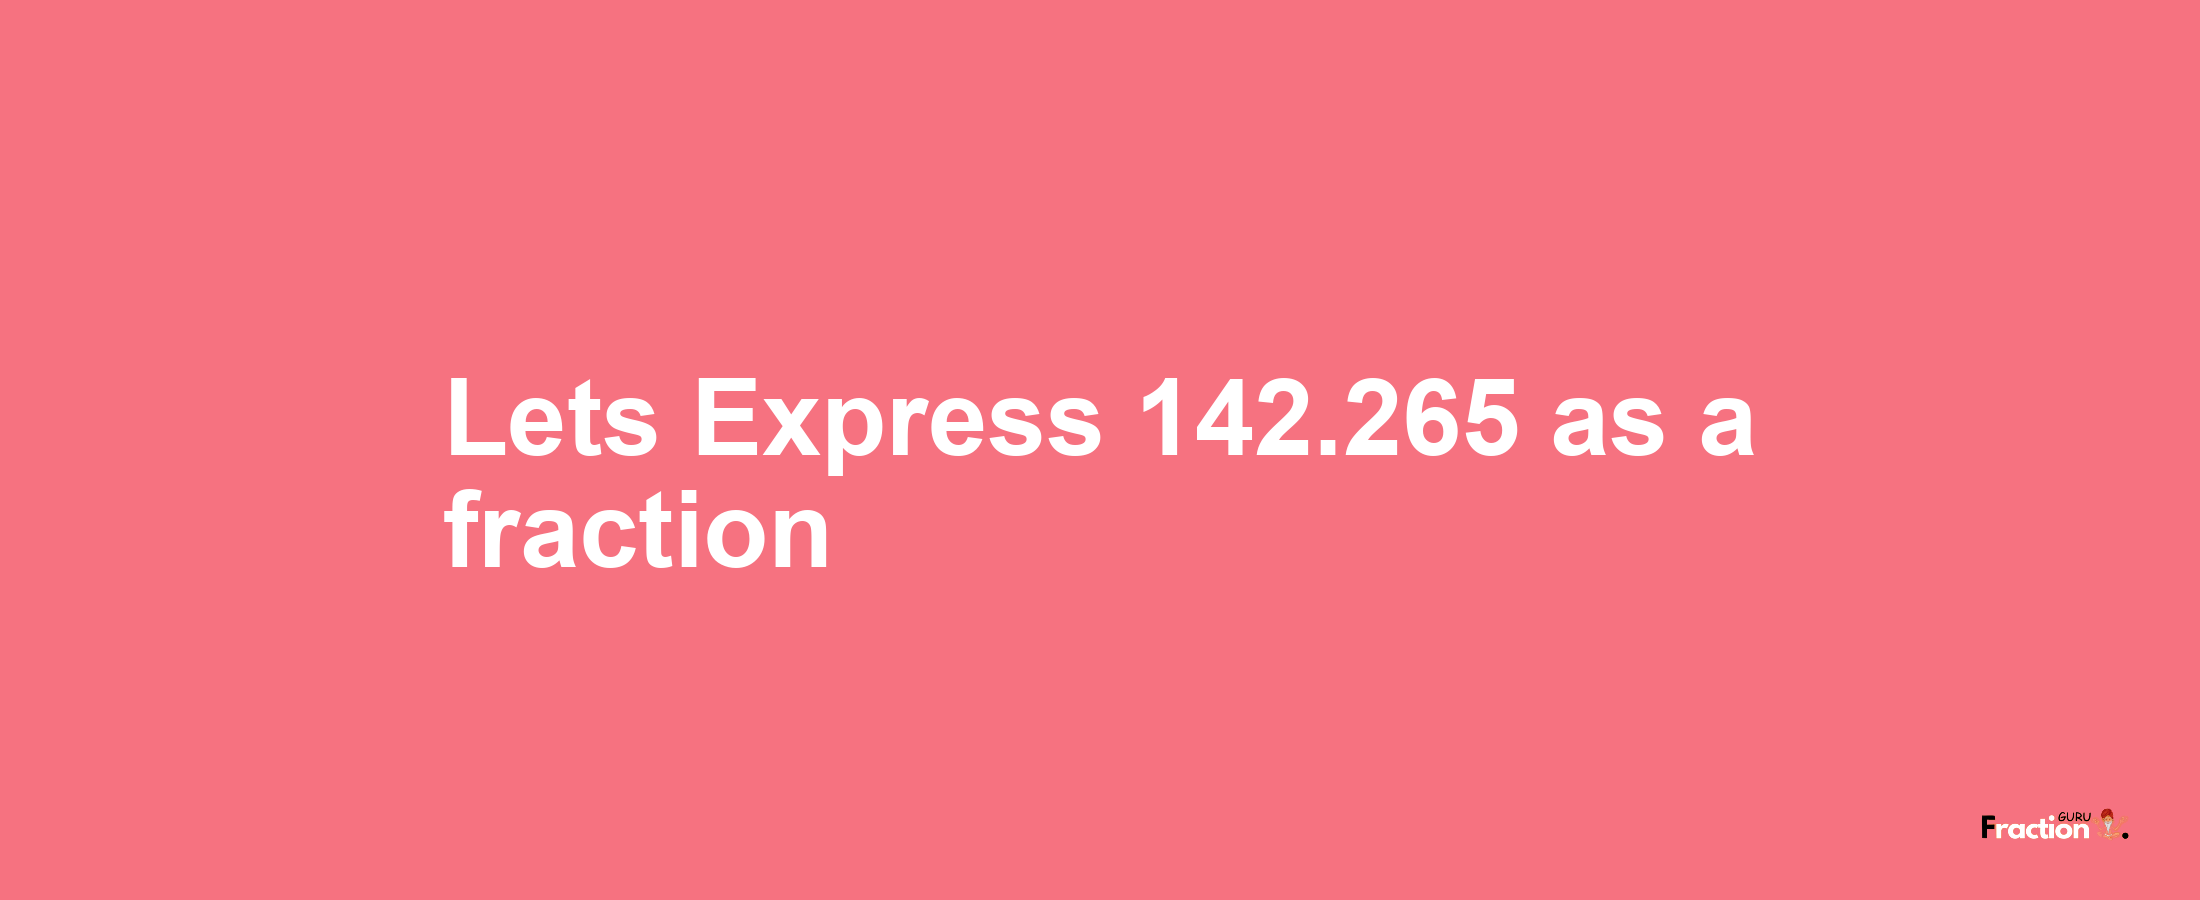 Lets Express 142.265 as afraction